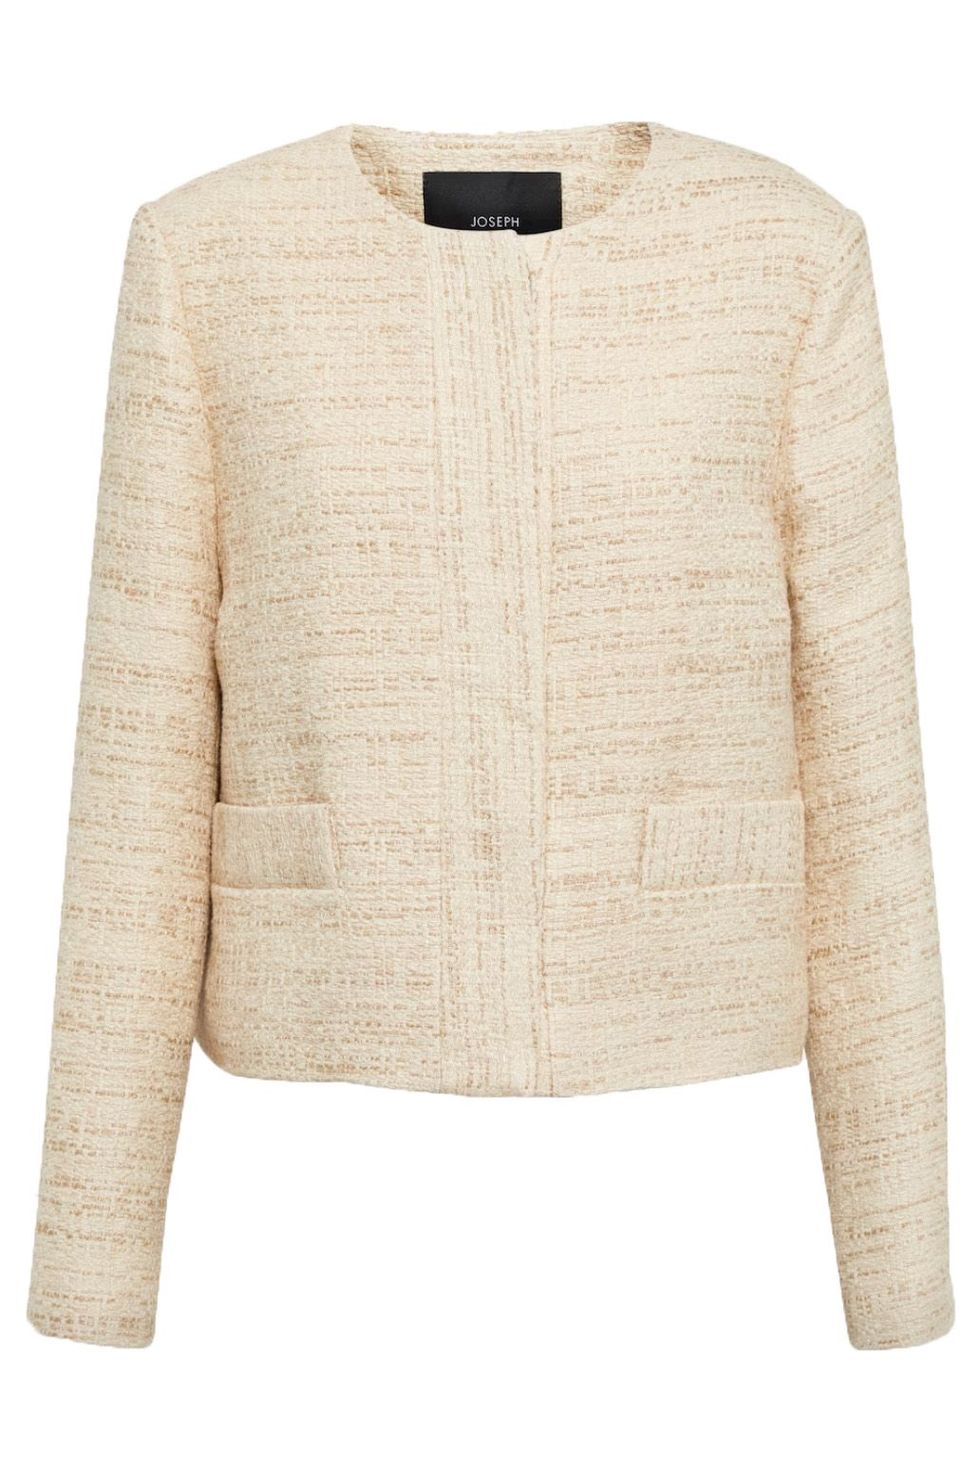 Kate embraces festive Style in a shimmering ivory tweed jacket